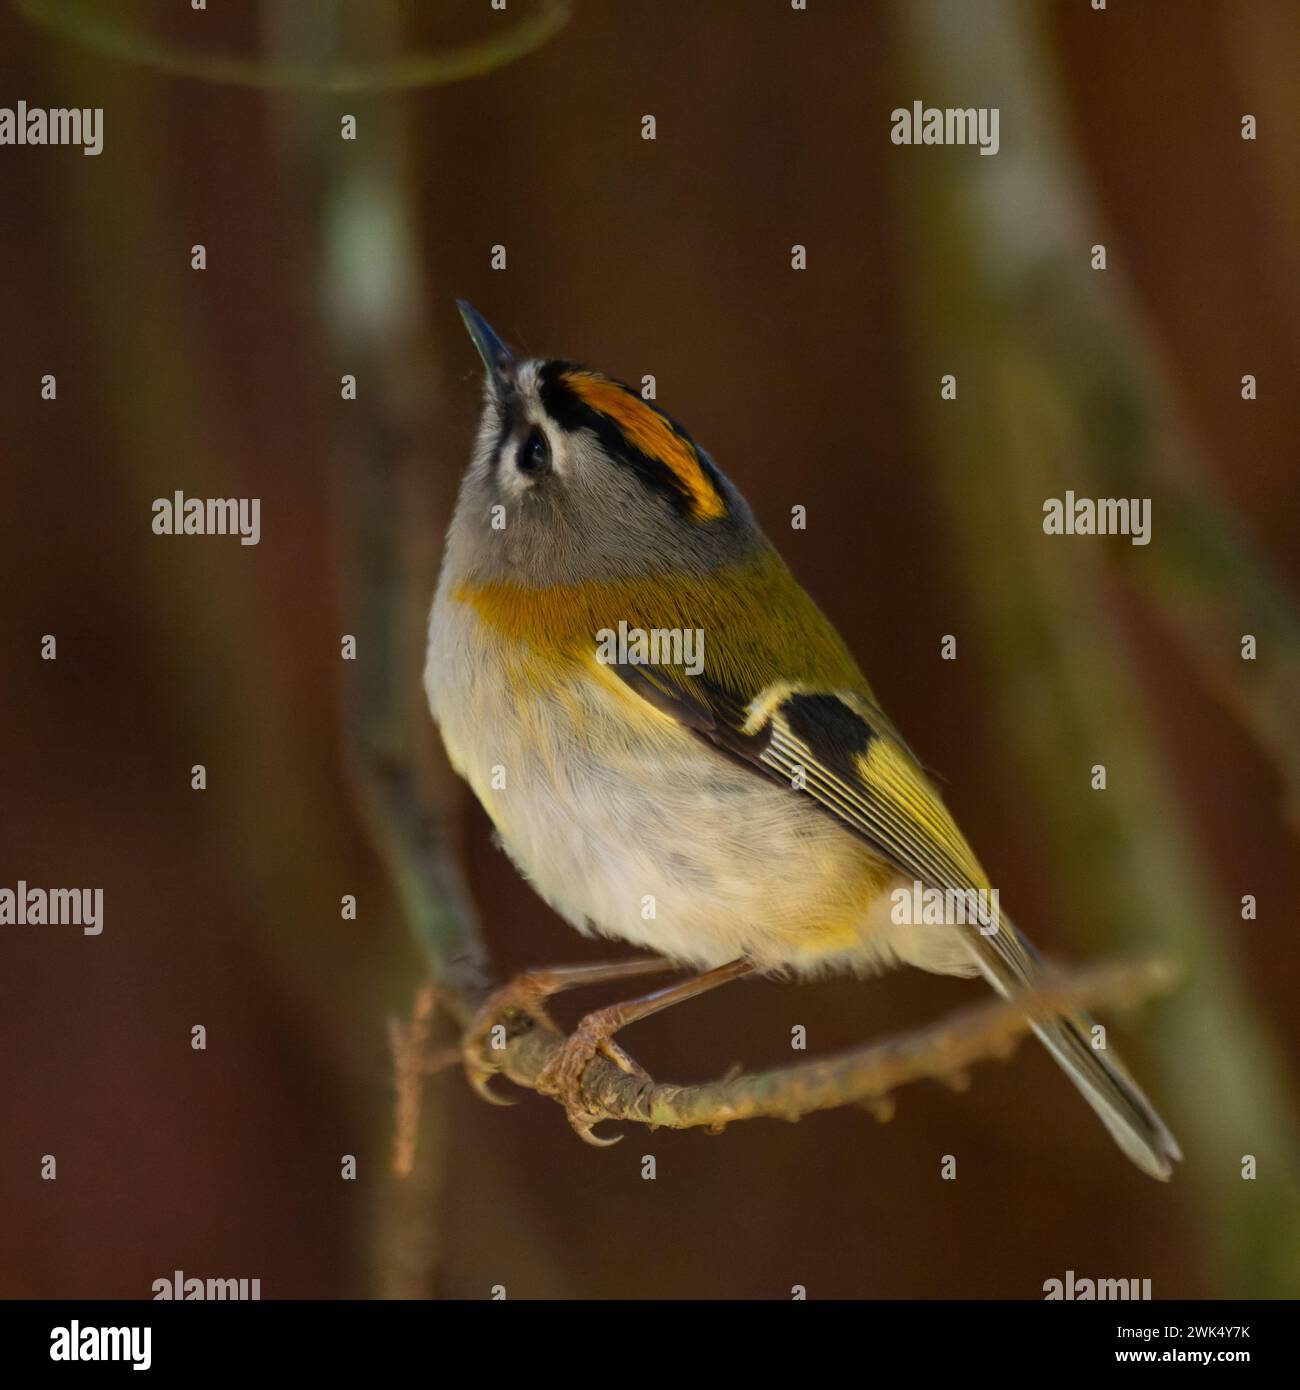 A Madeira firecrest, also known as Madeira kinglet, or Madeira crest, Regulus madeirensis, which is endemic to the island of Madeira. Stock Photo